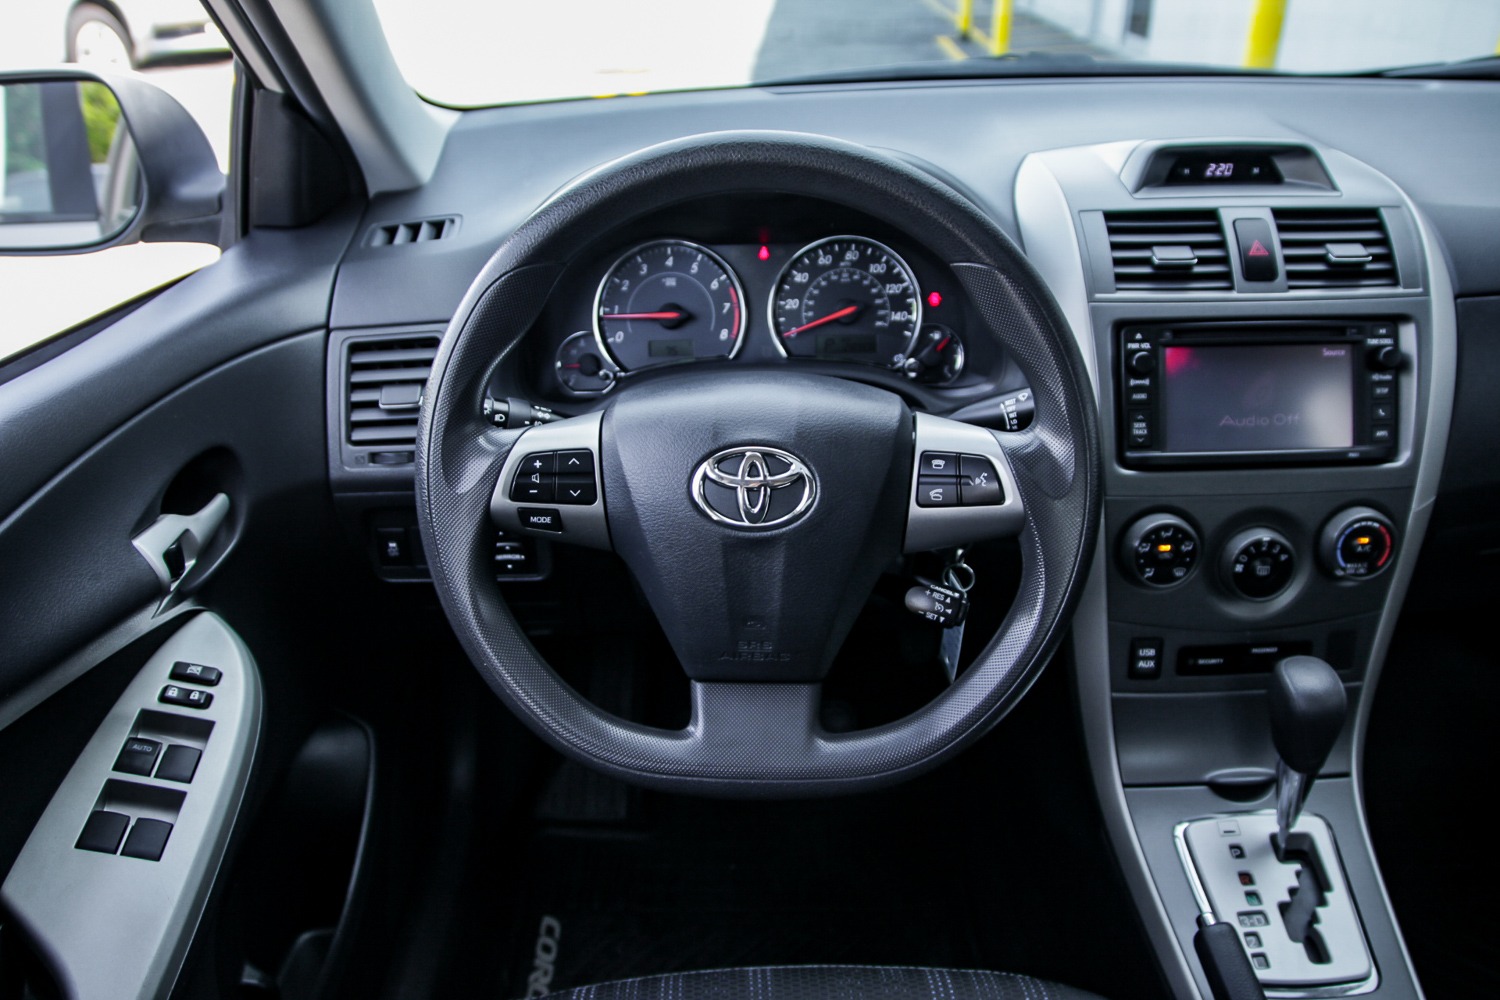 Used 2012 Toyota Corolla S Base For Sale 10 999